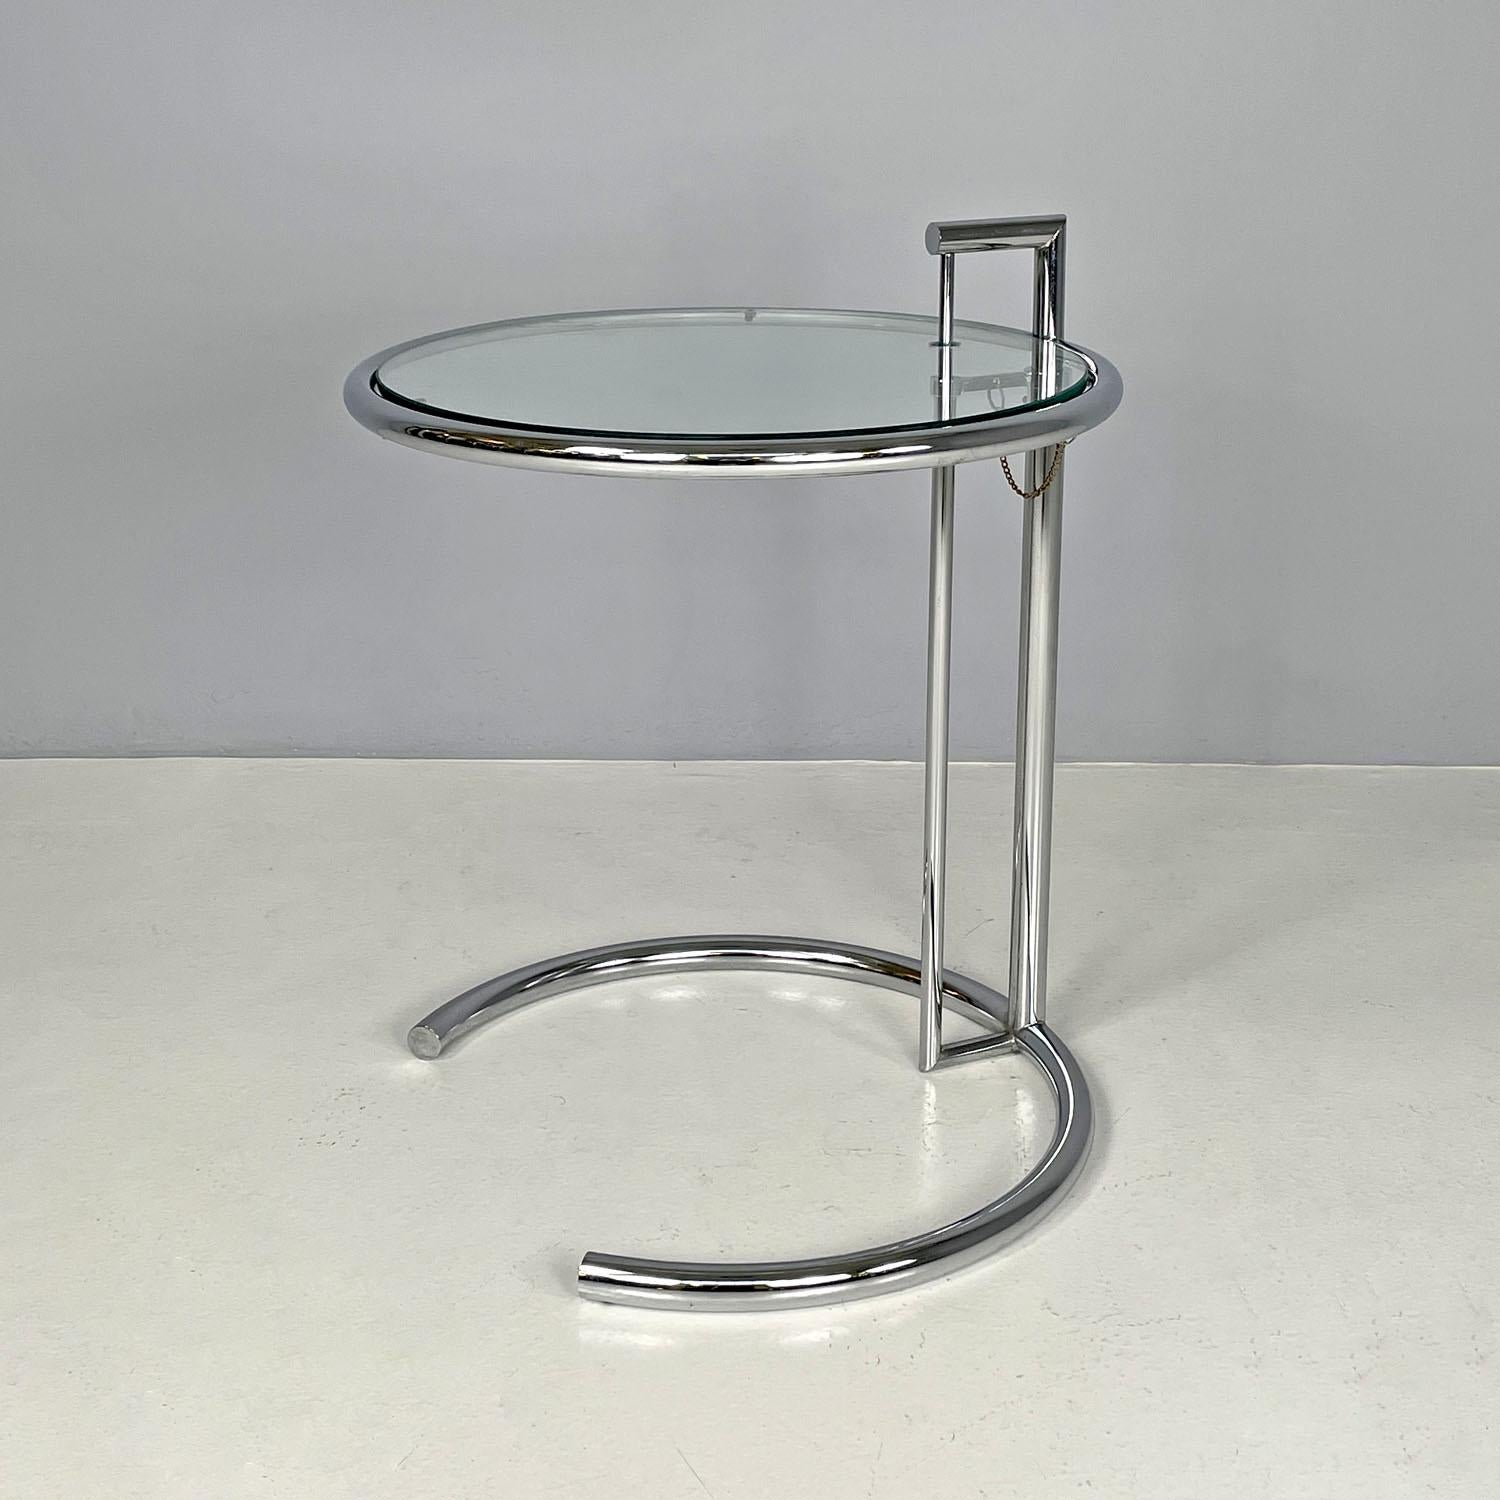 United Kingdom modern chromed metal glass coffee table E 1027 Eileen Gray, 1990s
Adjustable coffee table mod. E 1027, with round base structure in shiny chromed tubular steel, with glass top. The top is adjustable in height, thanks to a metal stop